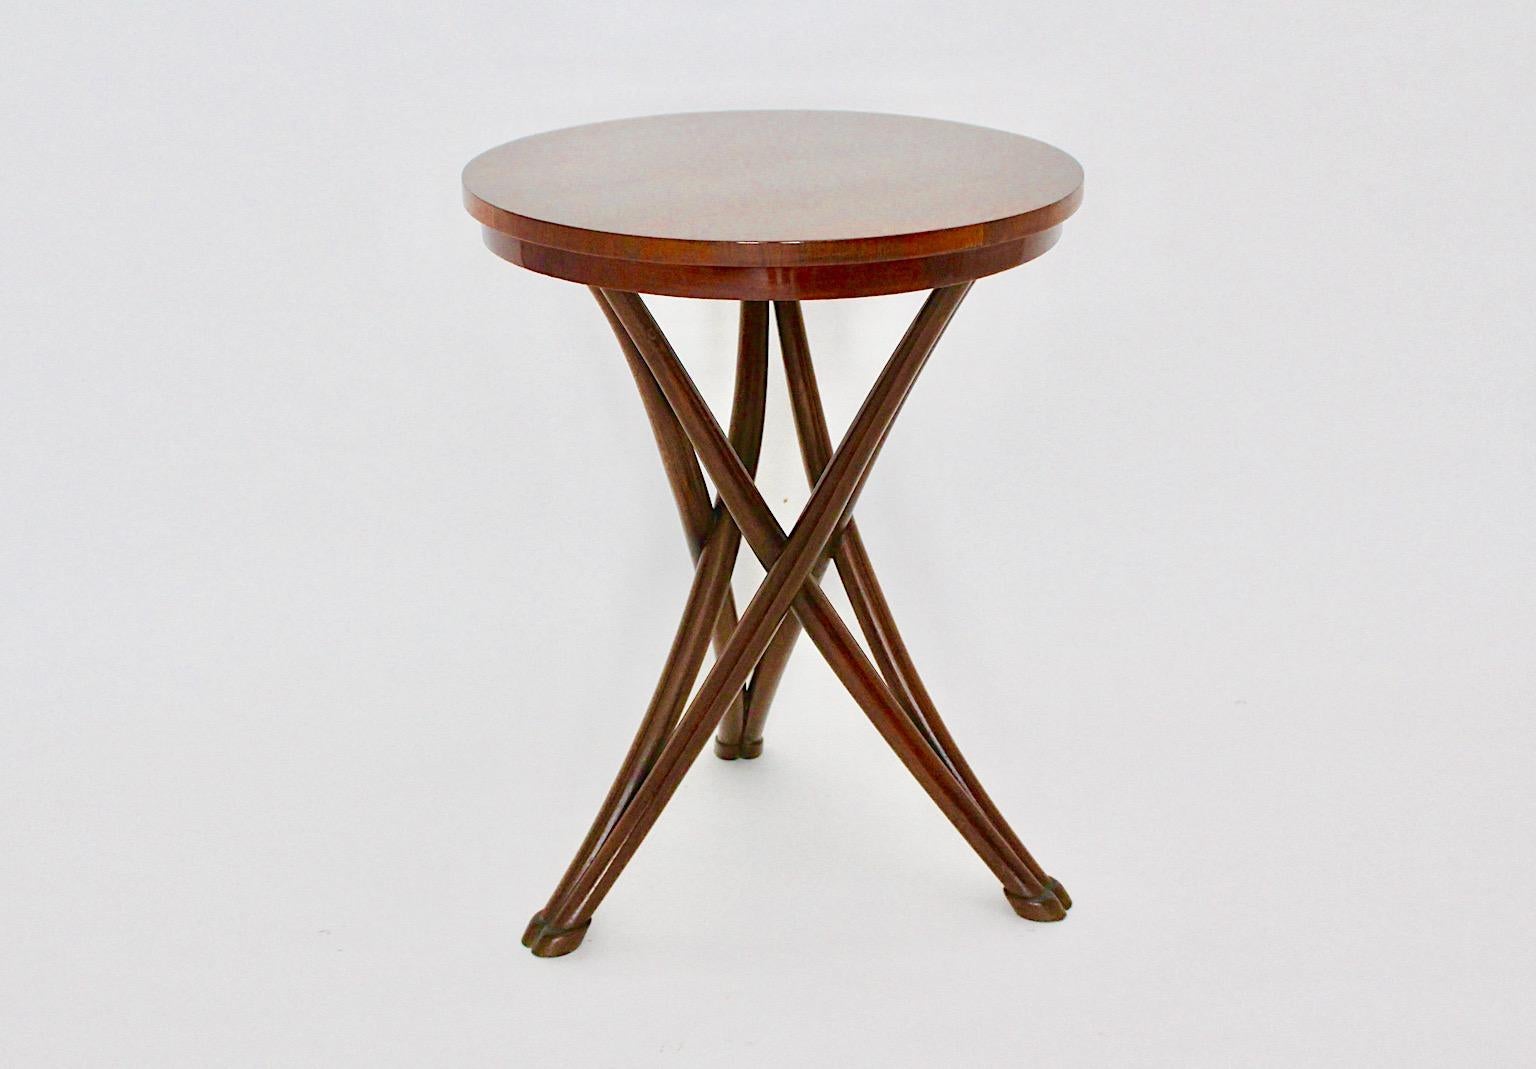 Late 19th Century Historicism Beech Bentwood Side Table No 13 by August Thonet circa 1880 Vienna For Sale